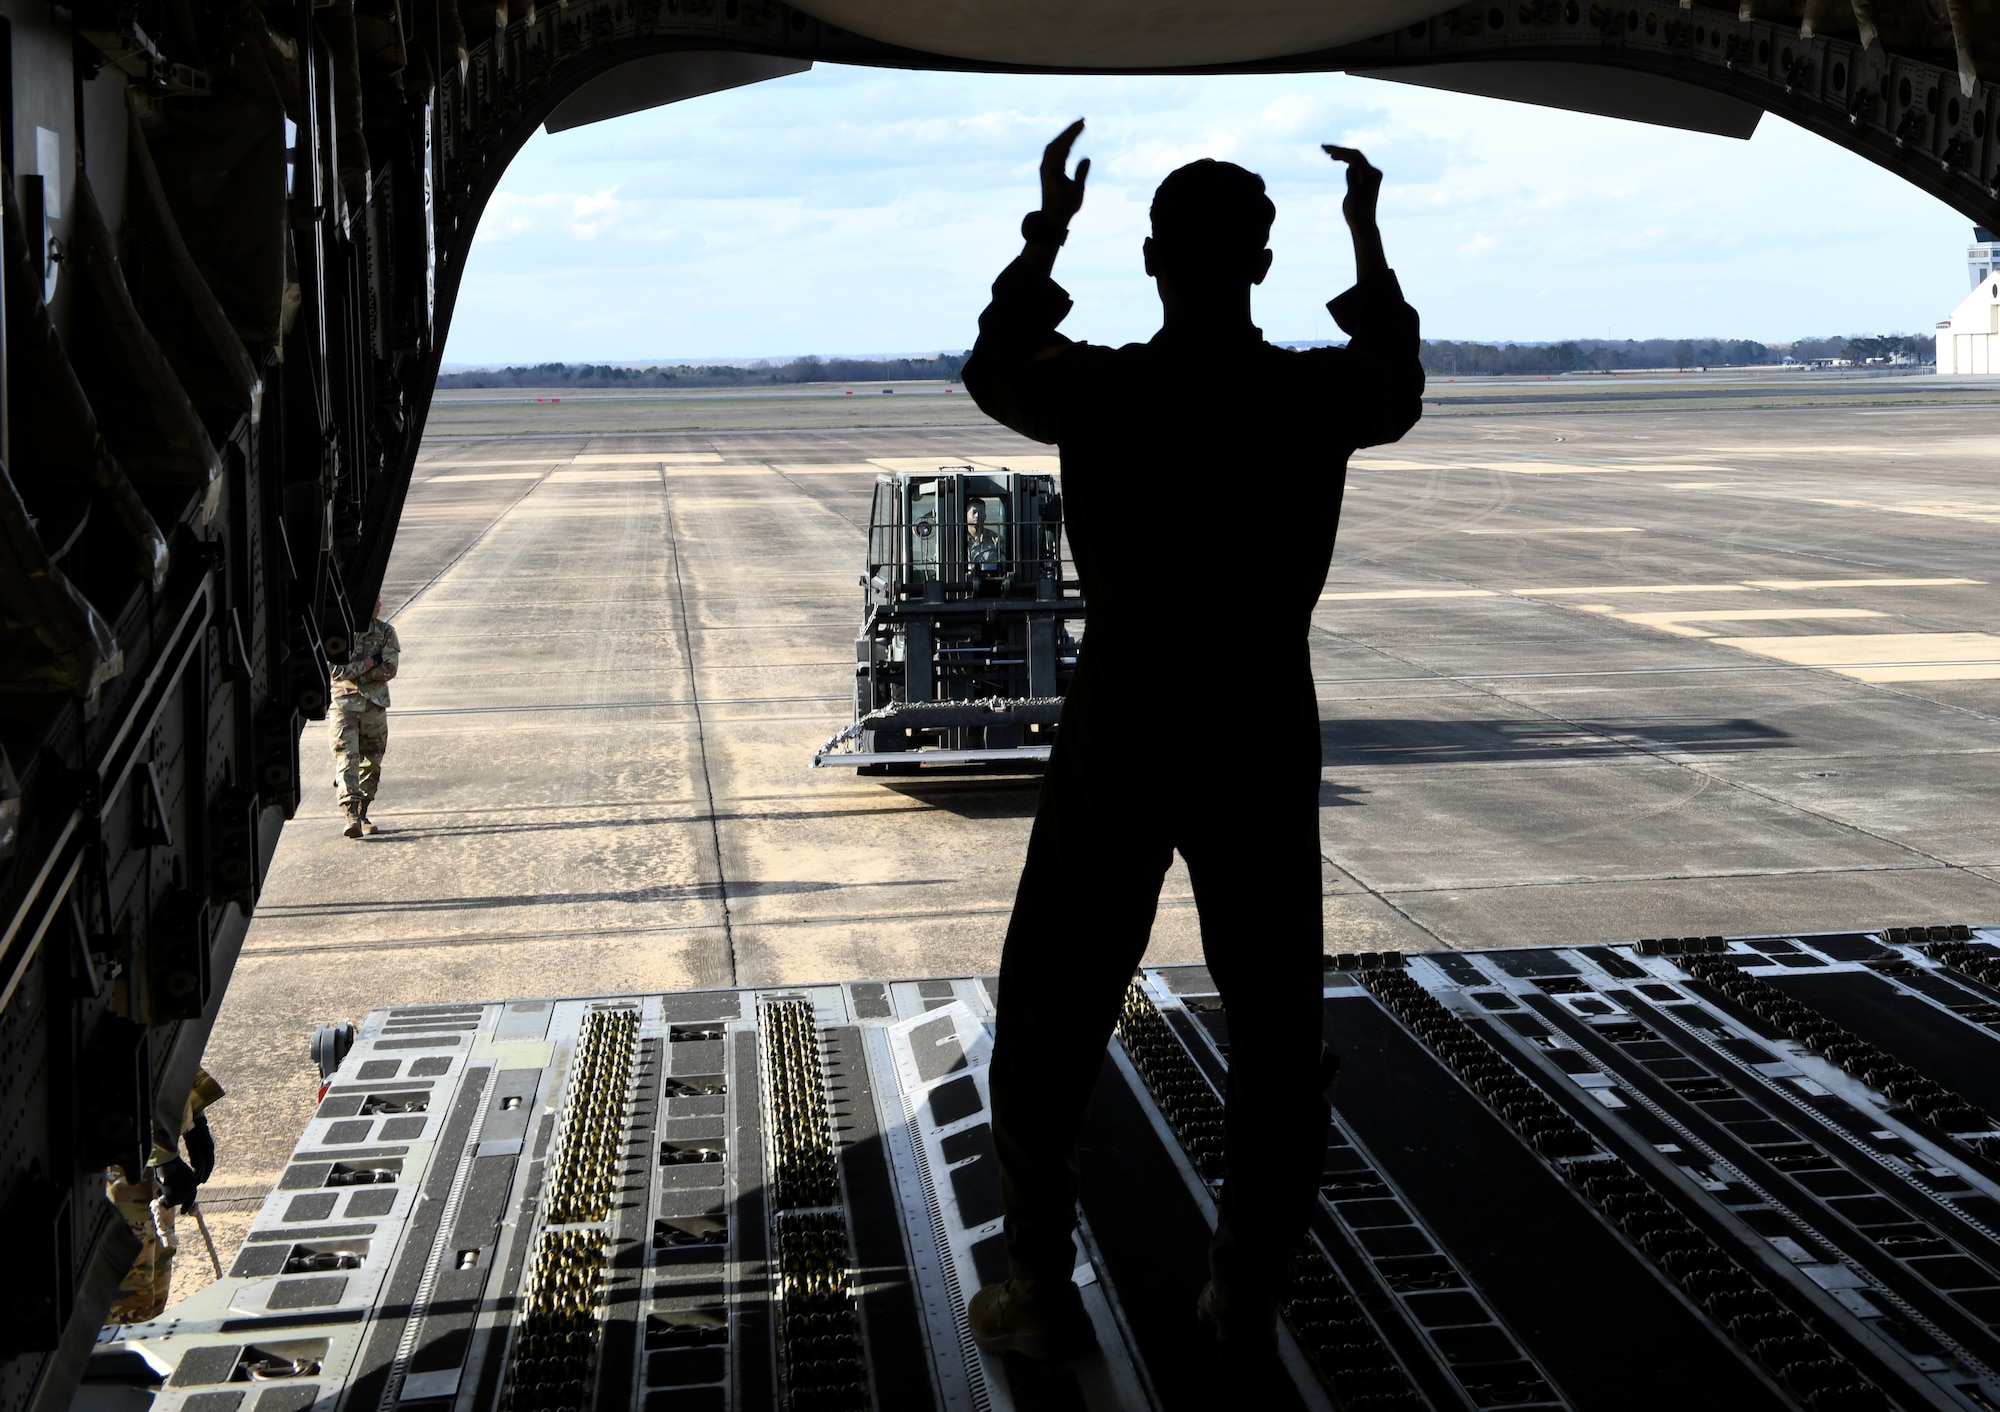 A C-130 aircrew member performs loading demo Feb 16, 2022 at Maxwell Air Force Base, Al. Air University’s Innovation Center and MGMWERX partnered with the 187th Fighter Wing and the 908th airlift wing to provide Auburn University students with a C-130 loading demo and C-17 static. (U.S. Air Force photo by Senior Airman Rhonda Smith)